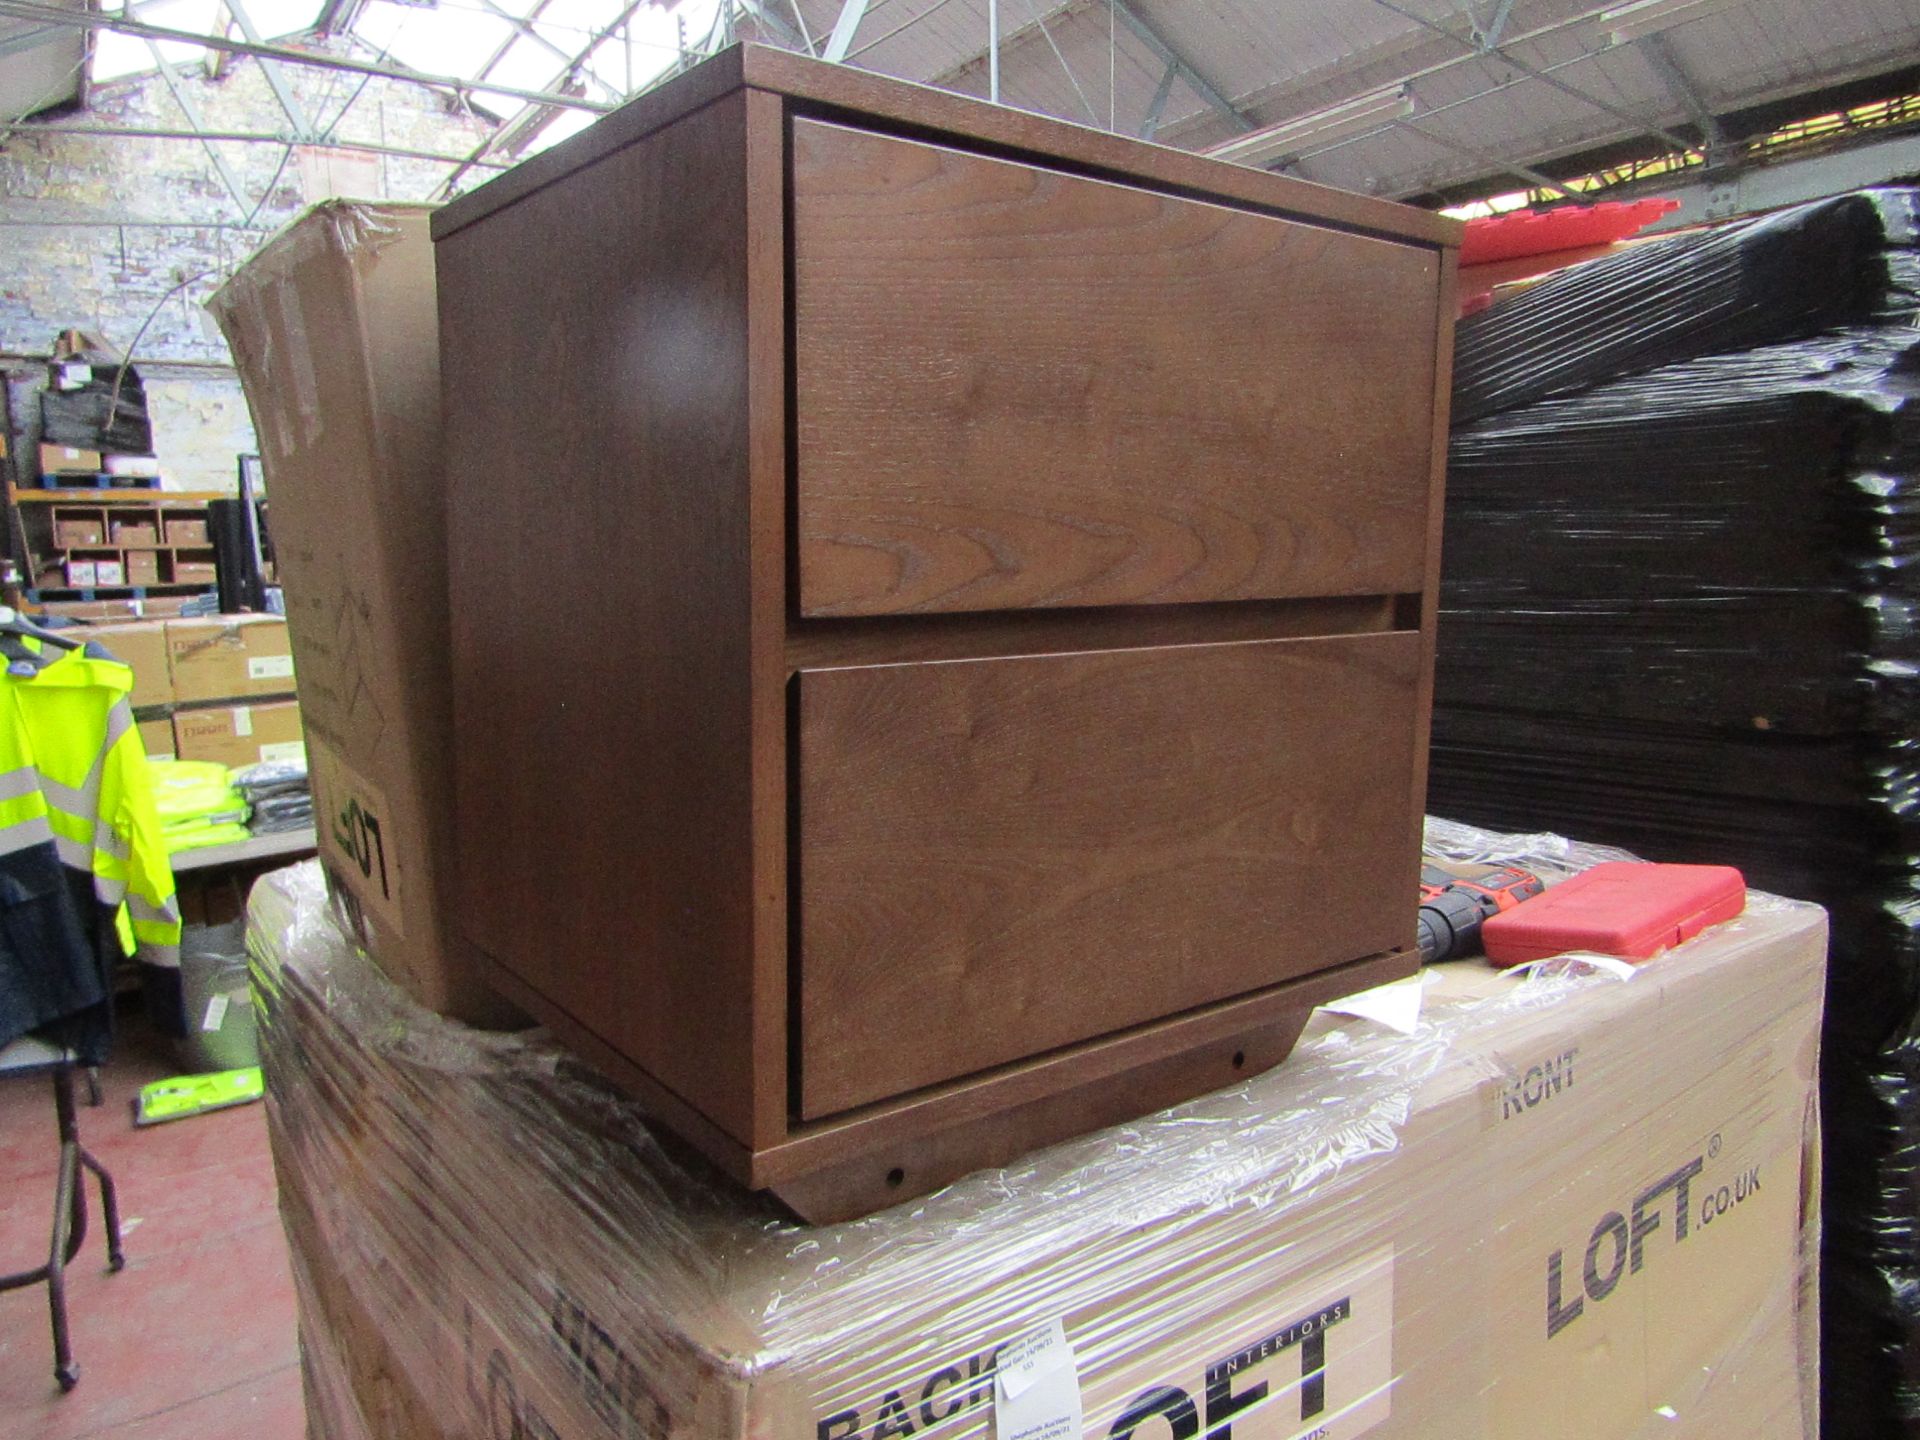 1x LOFT INTERIORS Moller Premium 2 Drawer Bedside Unit in Ash TOTAL RRP £120 This lot is a